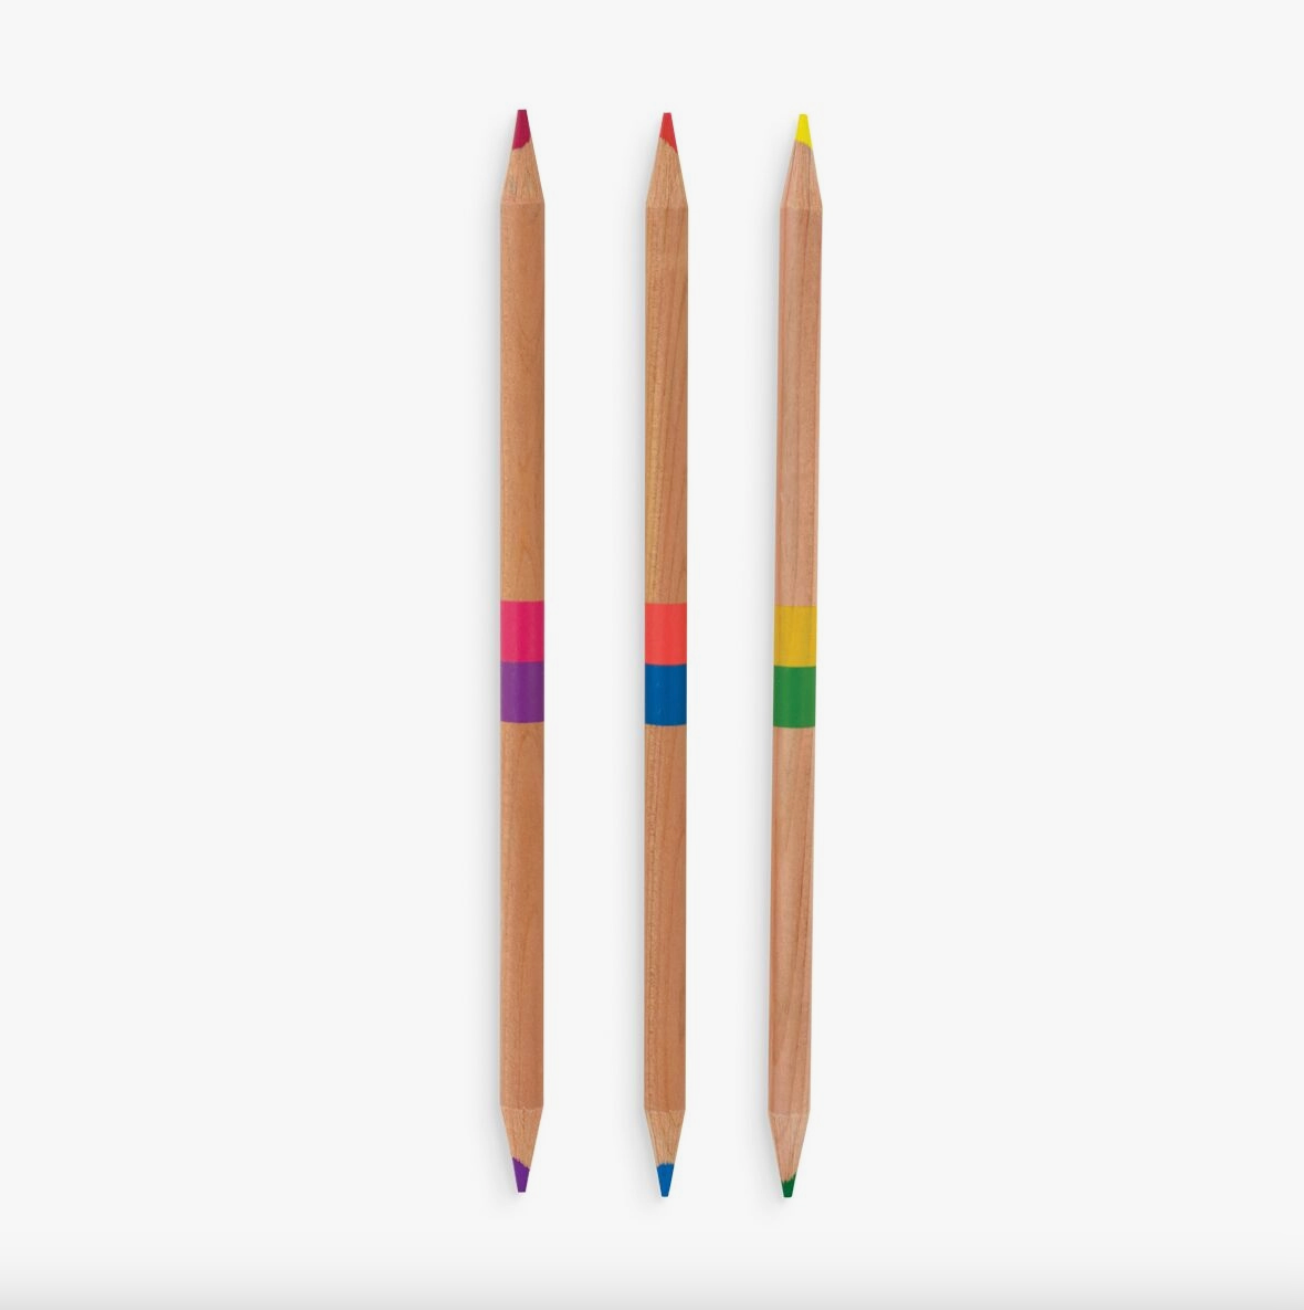 Double Ended Colored Pencils - Set of 12